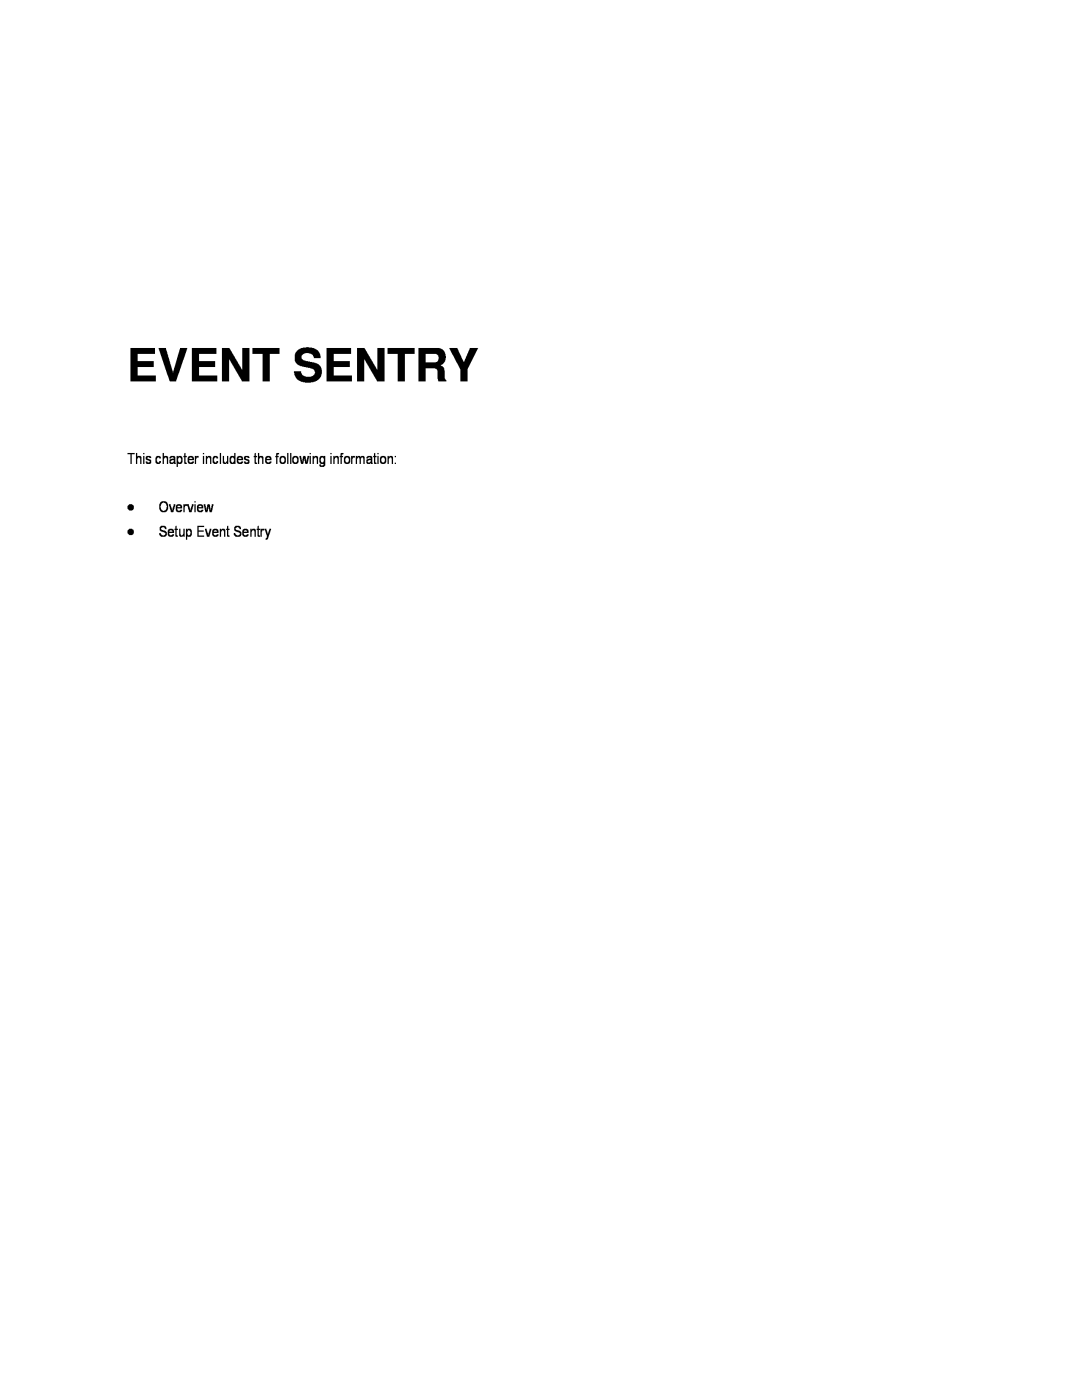 Toshiba EVR16-X, EVR8-X, EVR32-X, HVR32-X This chapter includes the following information Overview, Setup Event Sentry 